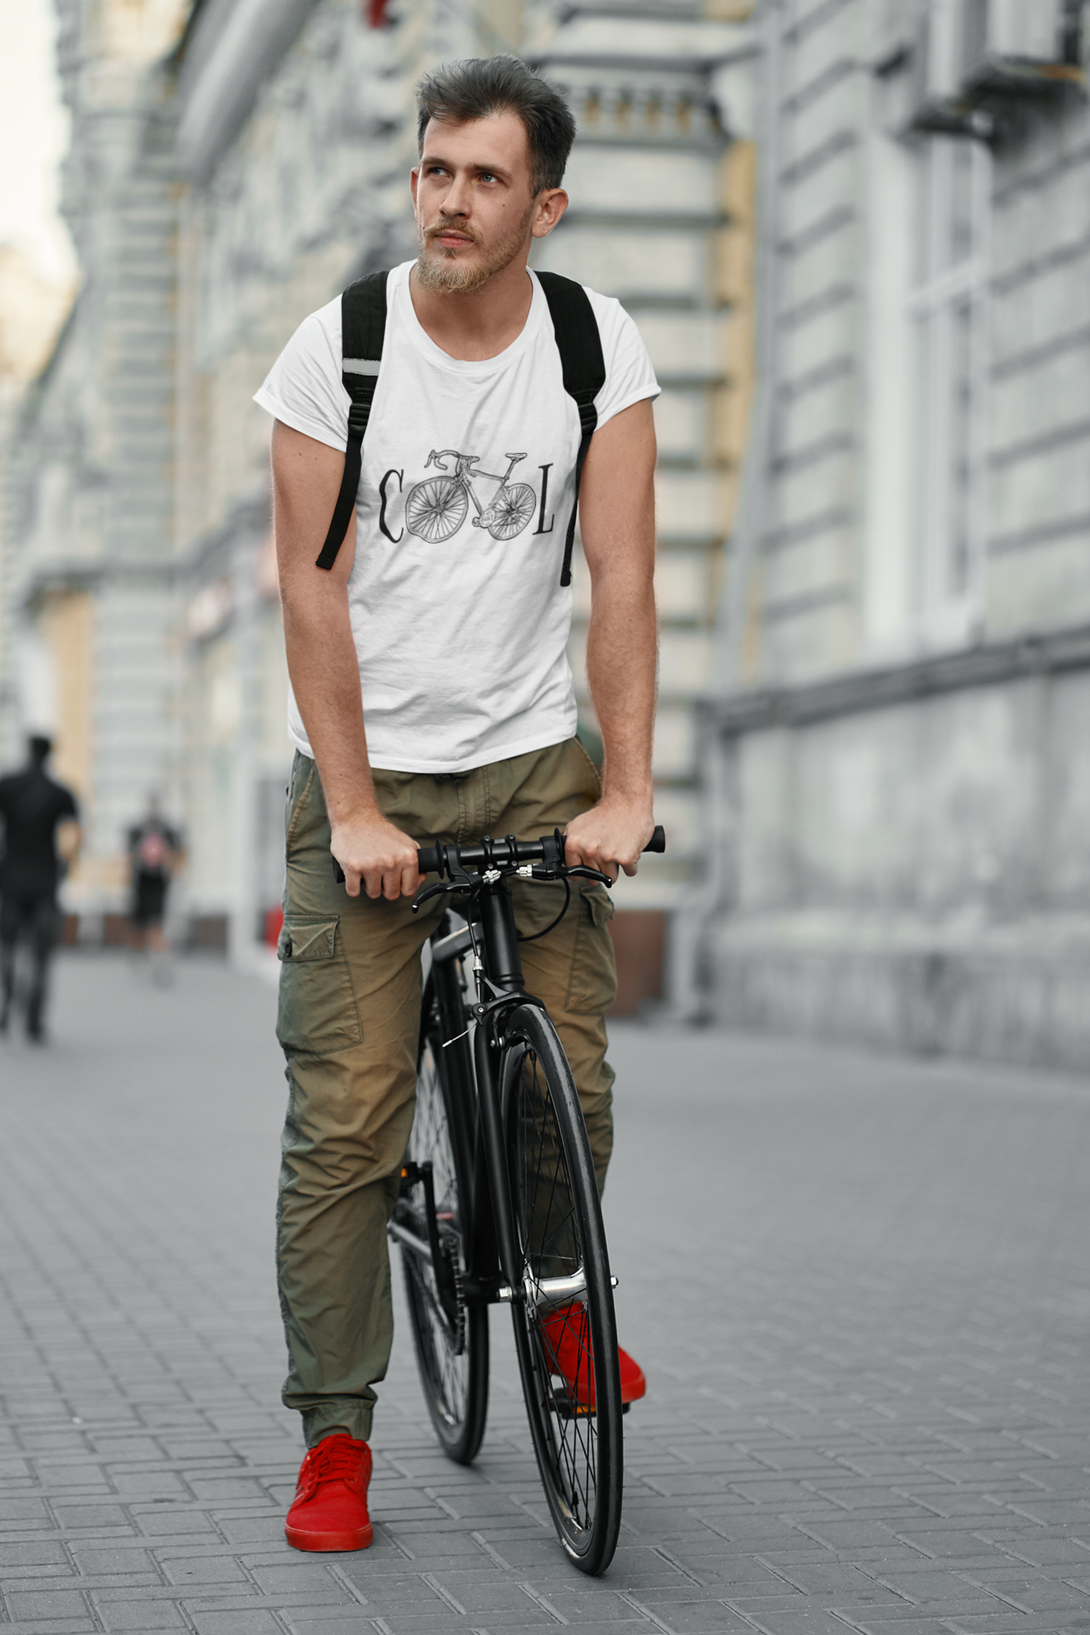 Cycle Coolness Printed T-Shirt For Men - WowWaves - 5